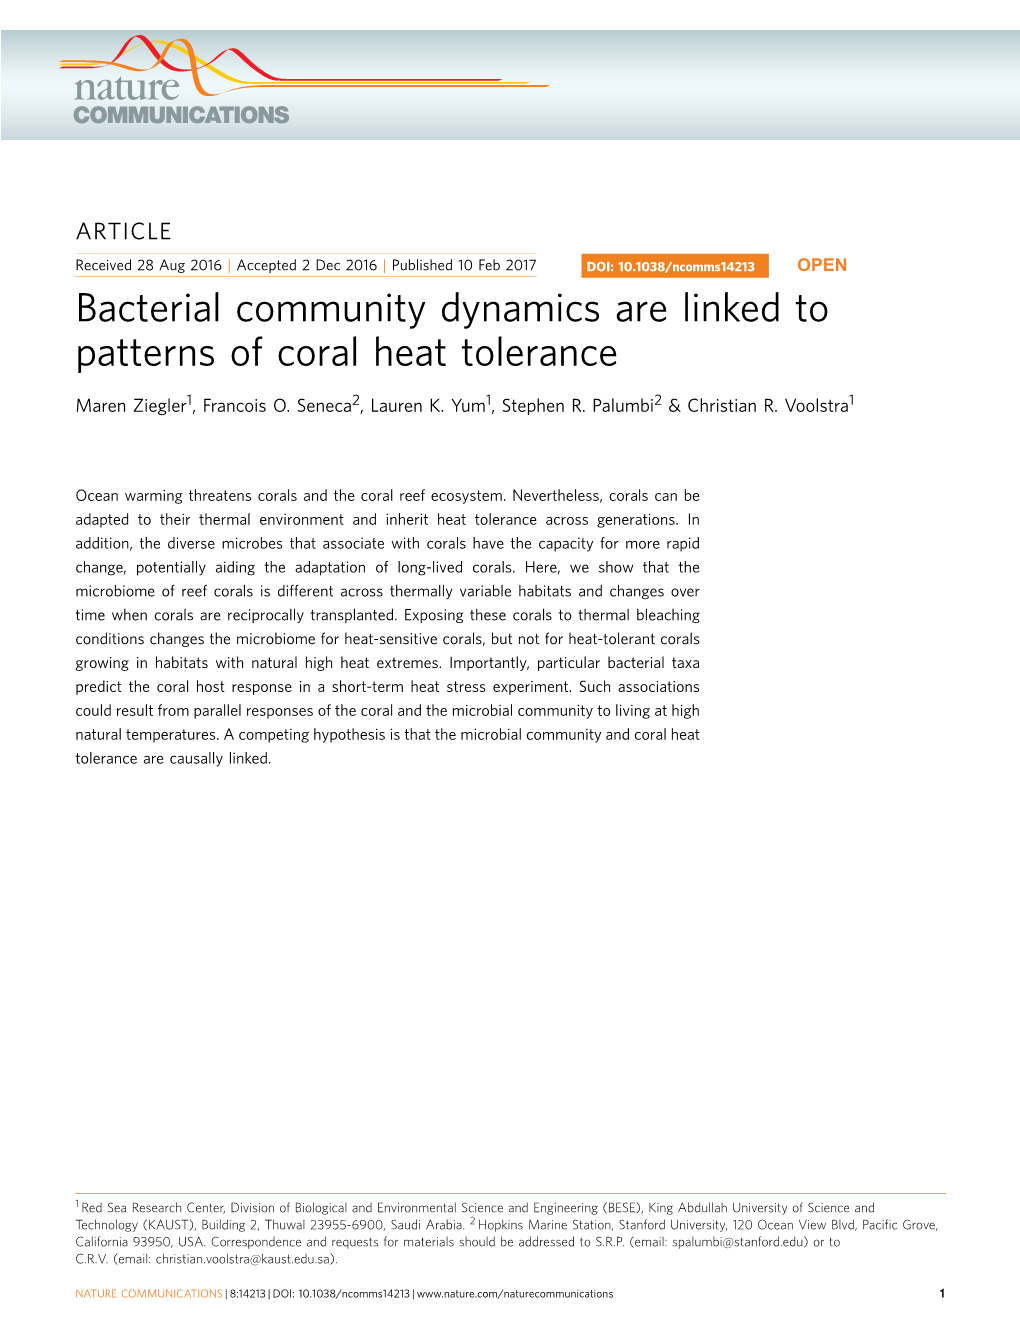 Bacterial Community Dynamics Are Linked to Patterns of Coral Heat Tolerance